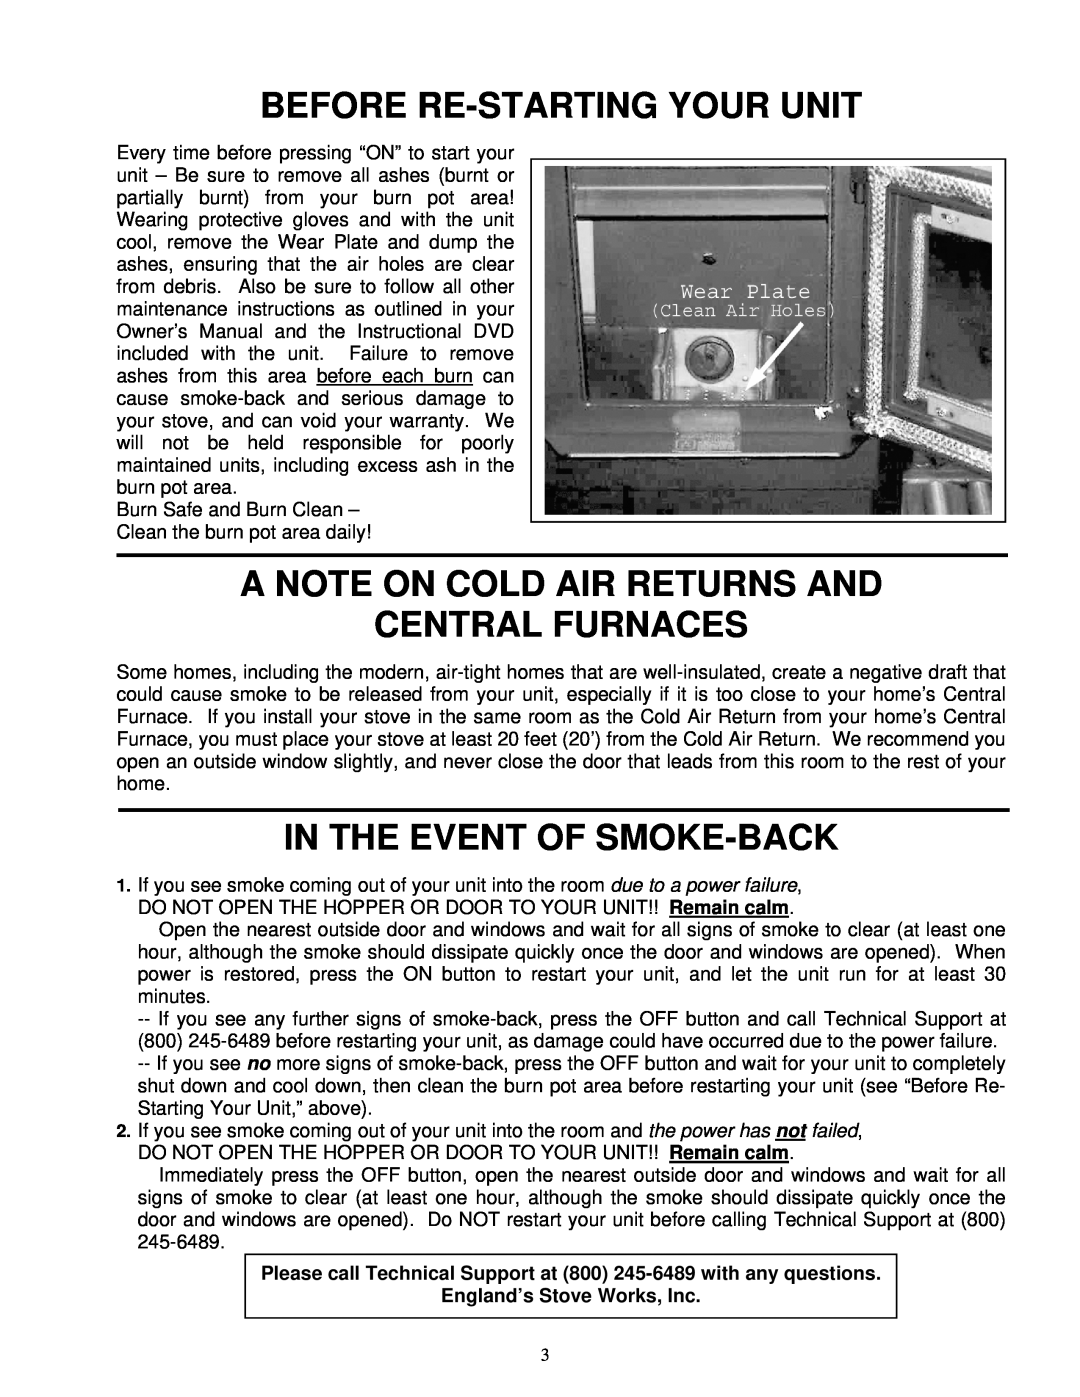 England's Stove Works PELLET STOVES Before Re-Starting Your Unit, A Note On Cold Air Returns And Central Furnaces 